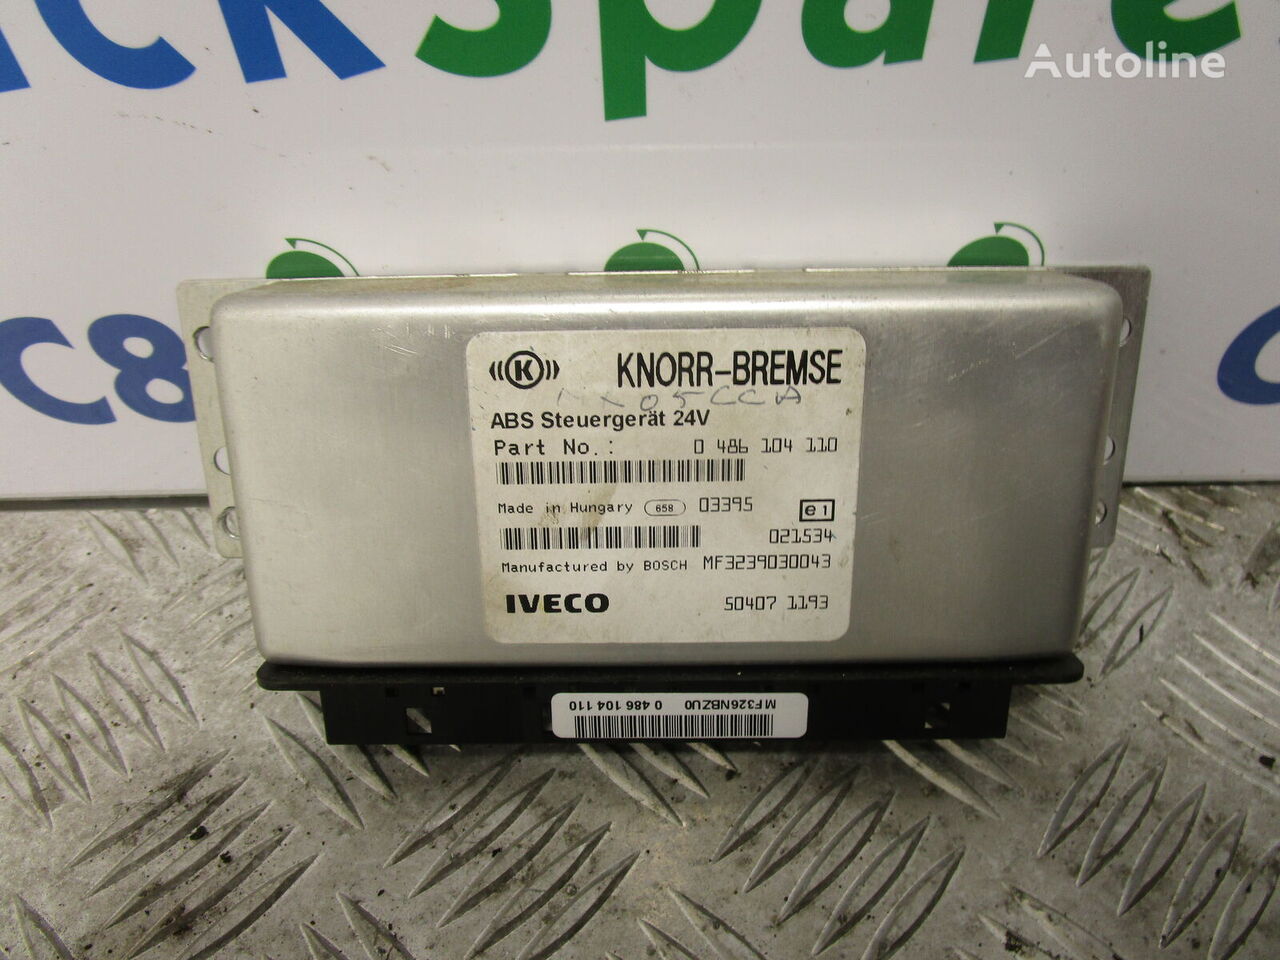 Knorr-Bremse 0486104110 control unit for IVECO TECTOR truck